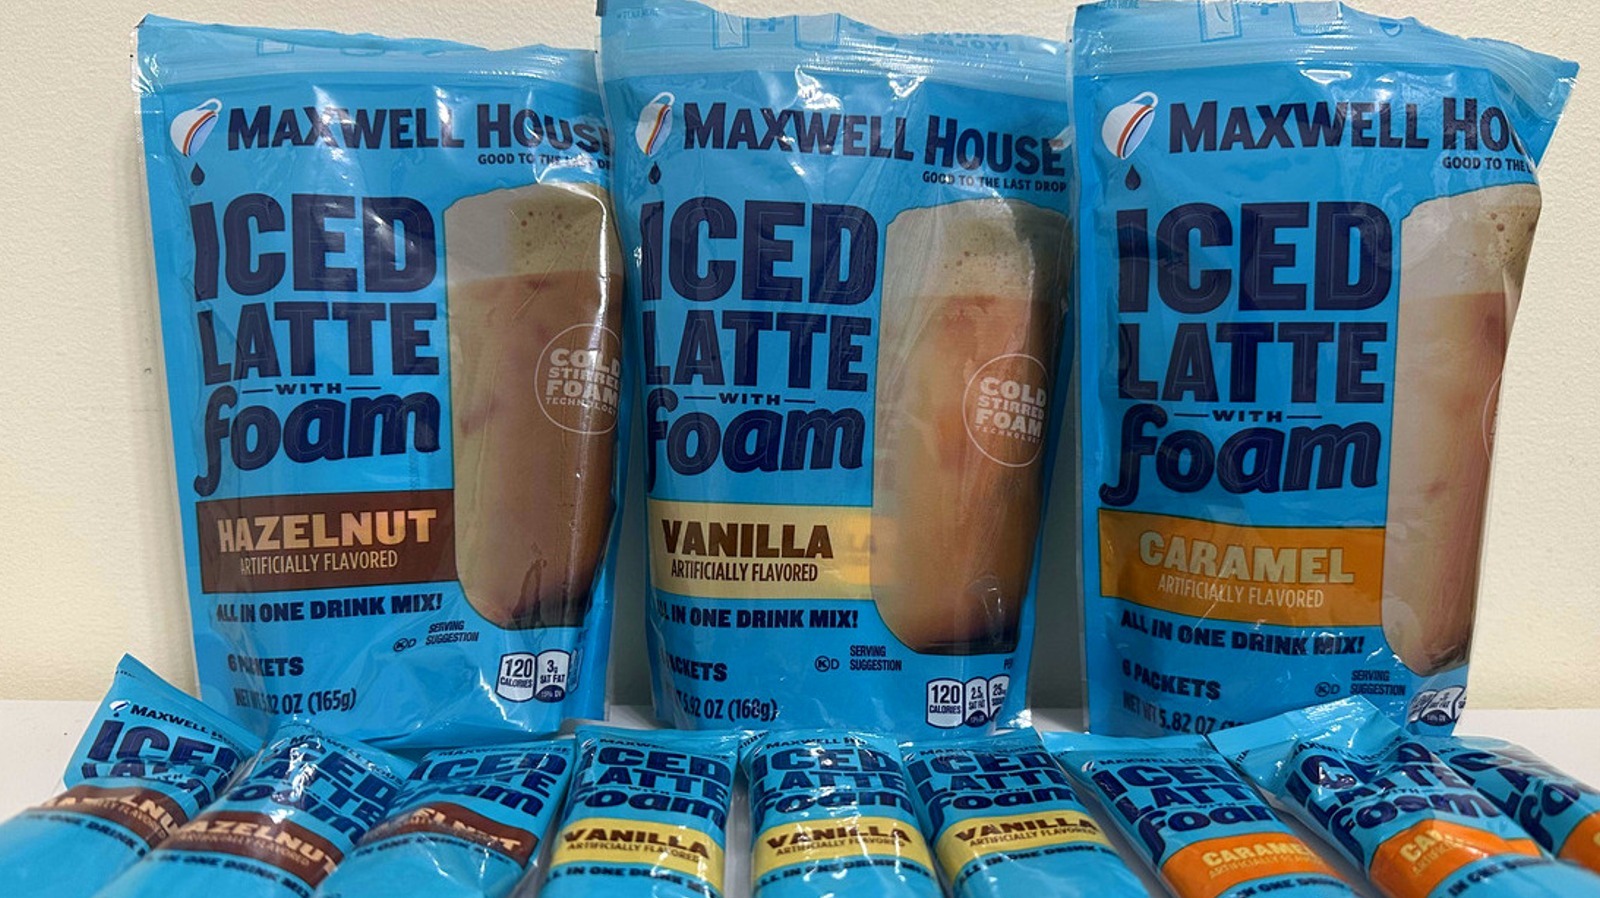 https://www.thedailymeal.com/img/gallery/new-maxwell-house-iced-latte-with-foam-review-impressive-not-delicious/l-intro-1691508364.jpg